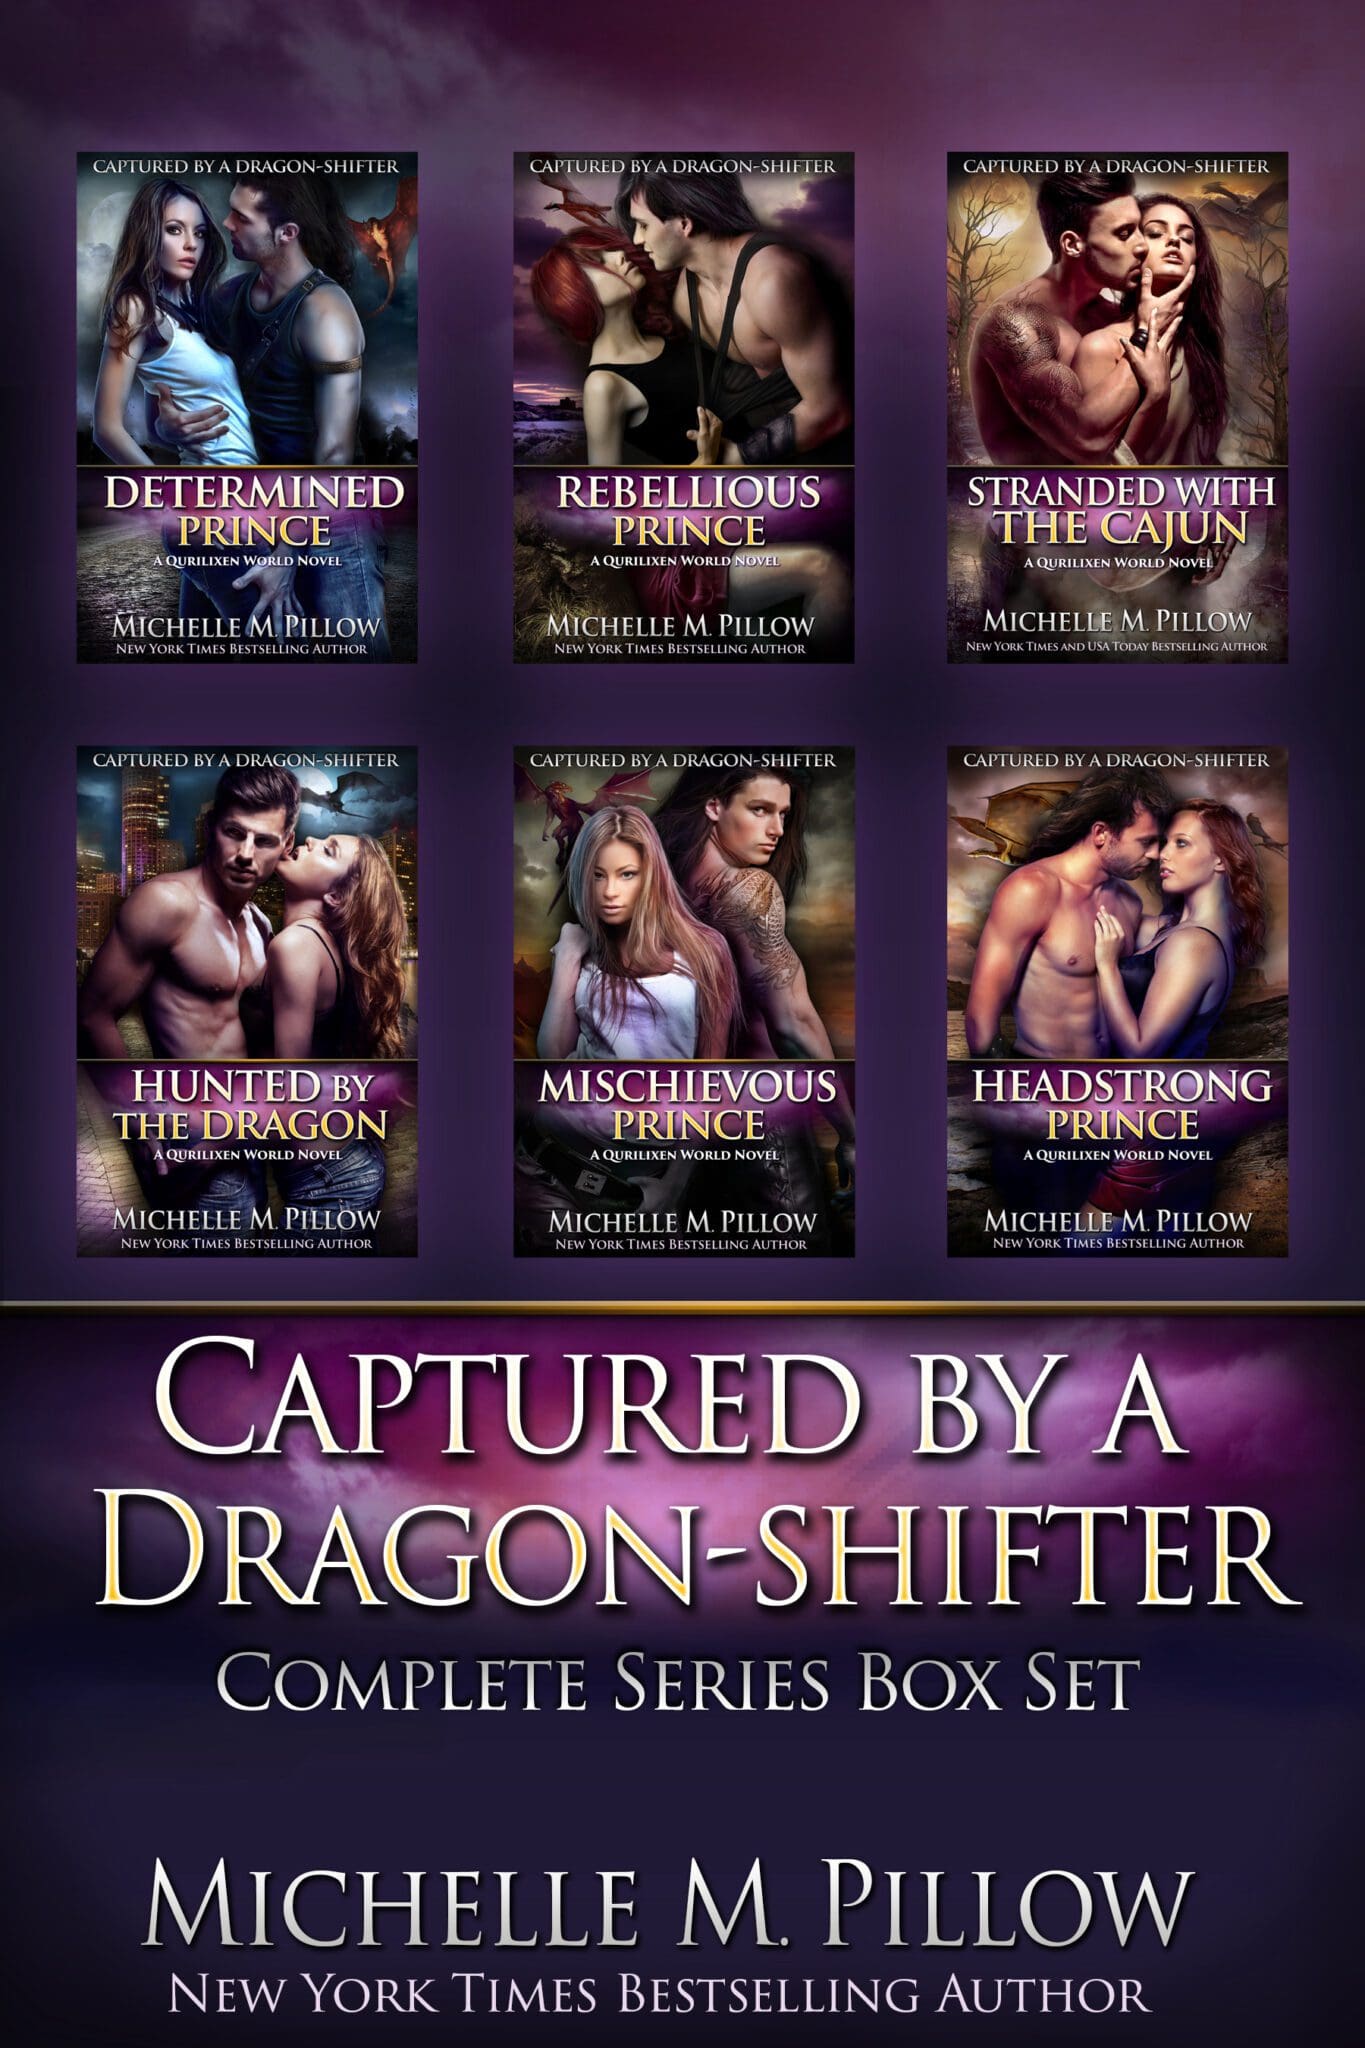 Captured by a Dragon-Shifter Box Set